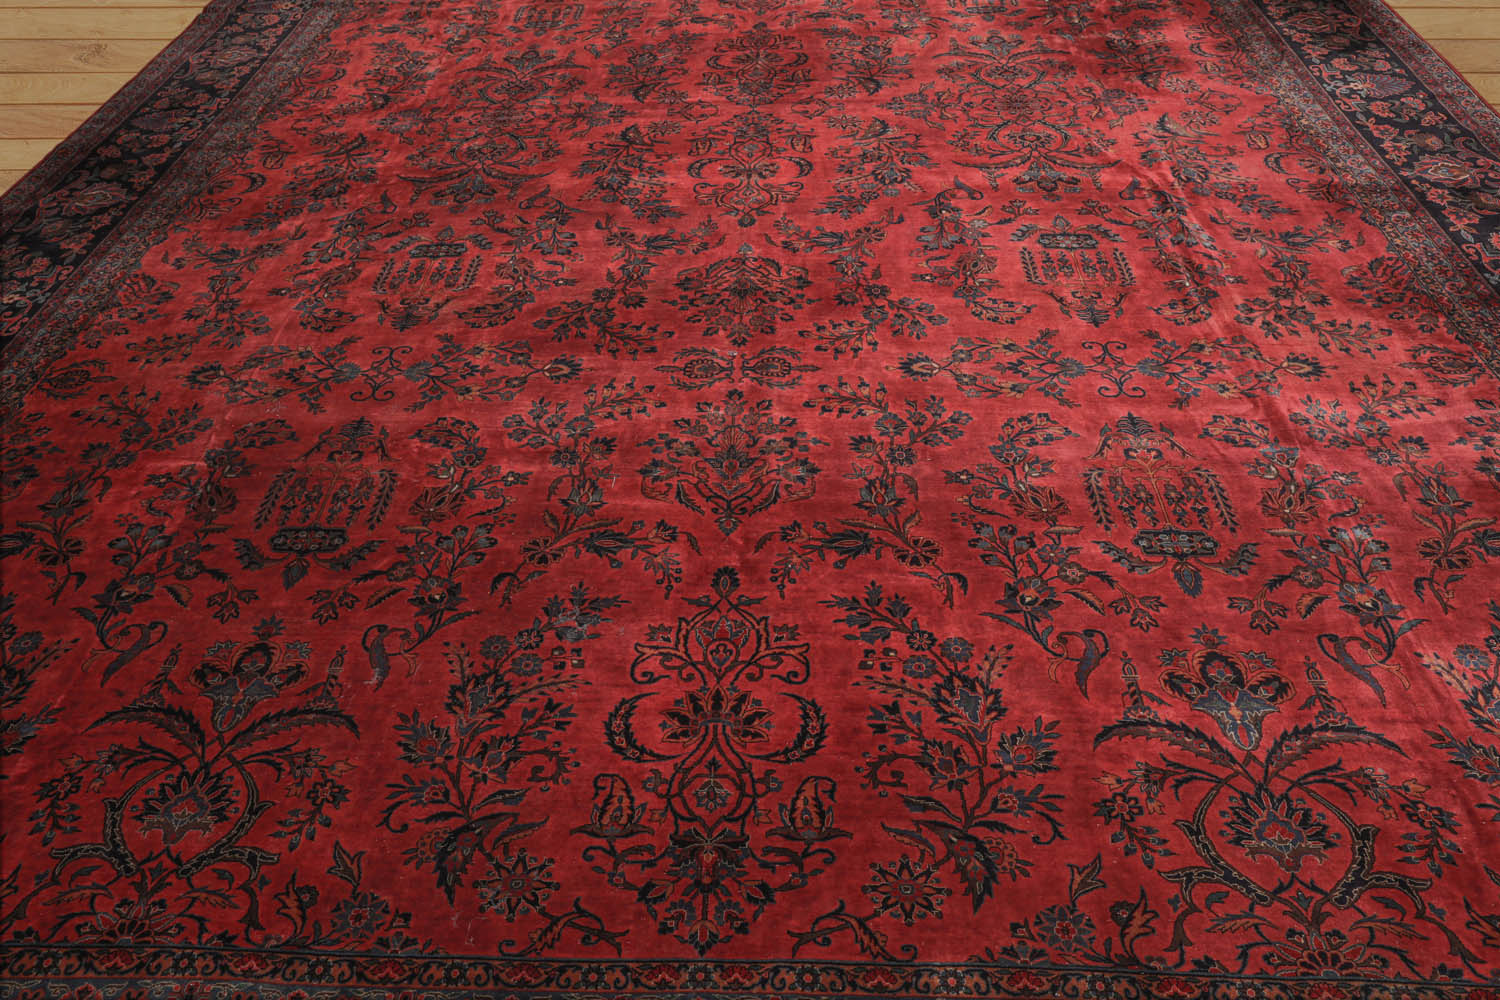 Annies Palace Hand Knotted Persian 100% Wool  Traditional  Oriental Area Rug Orangey Red,Navy Color